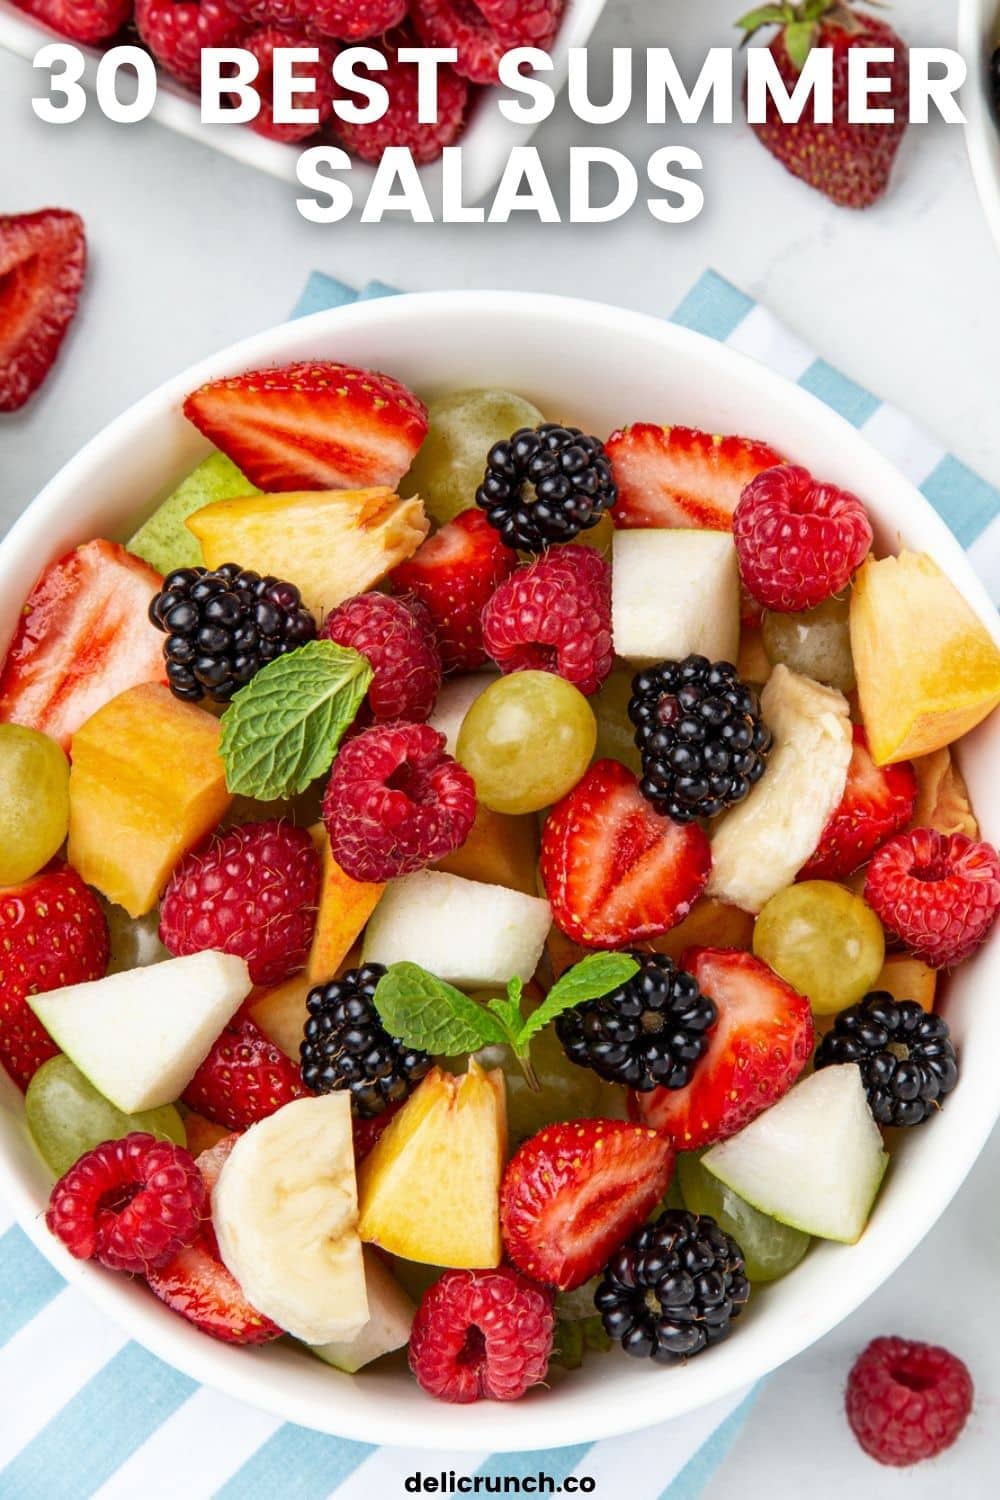 30 best summer salad recipes you can make this summer, easy to toss and contains in season ingredients. Either you like your summer salad with fruits like strawberries, peach, berries or protein like chicken, salmon or pasta you'll find it all here!